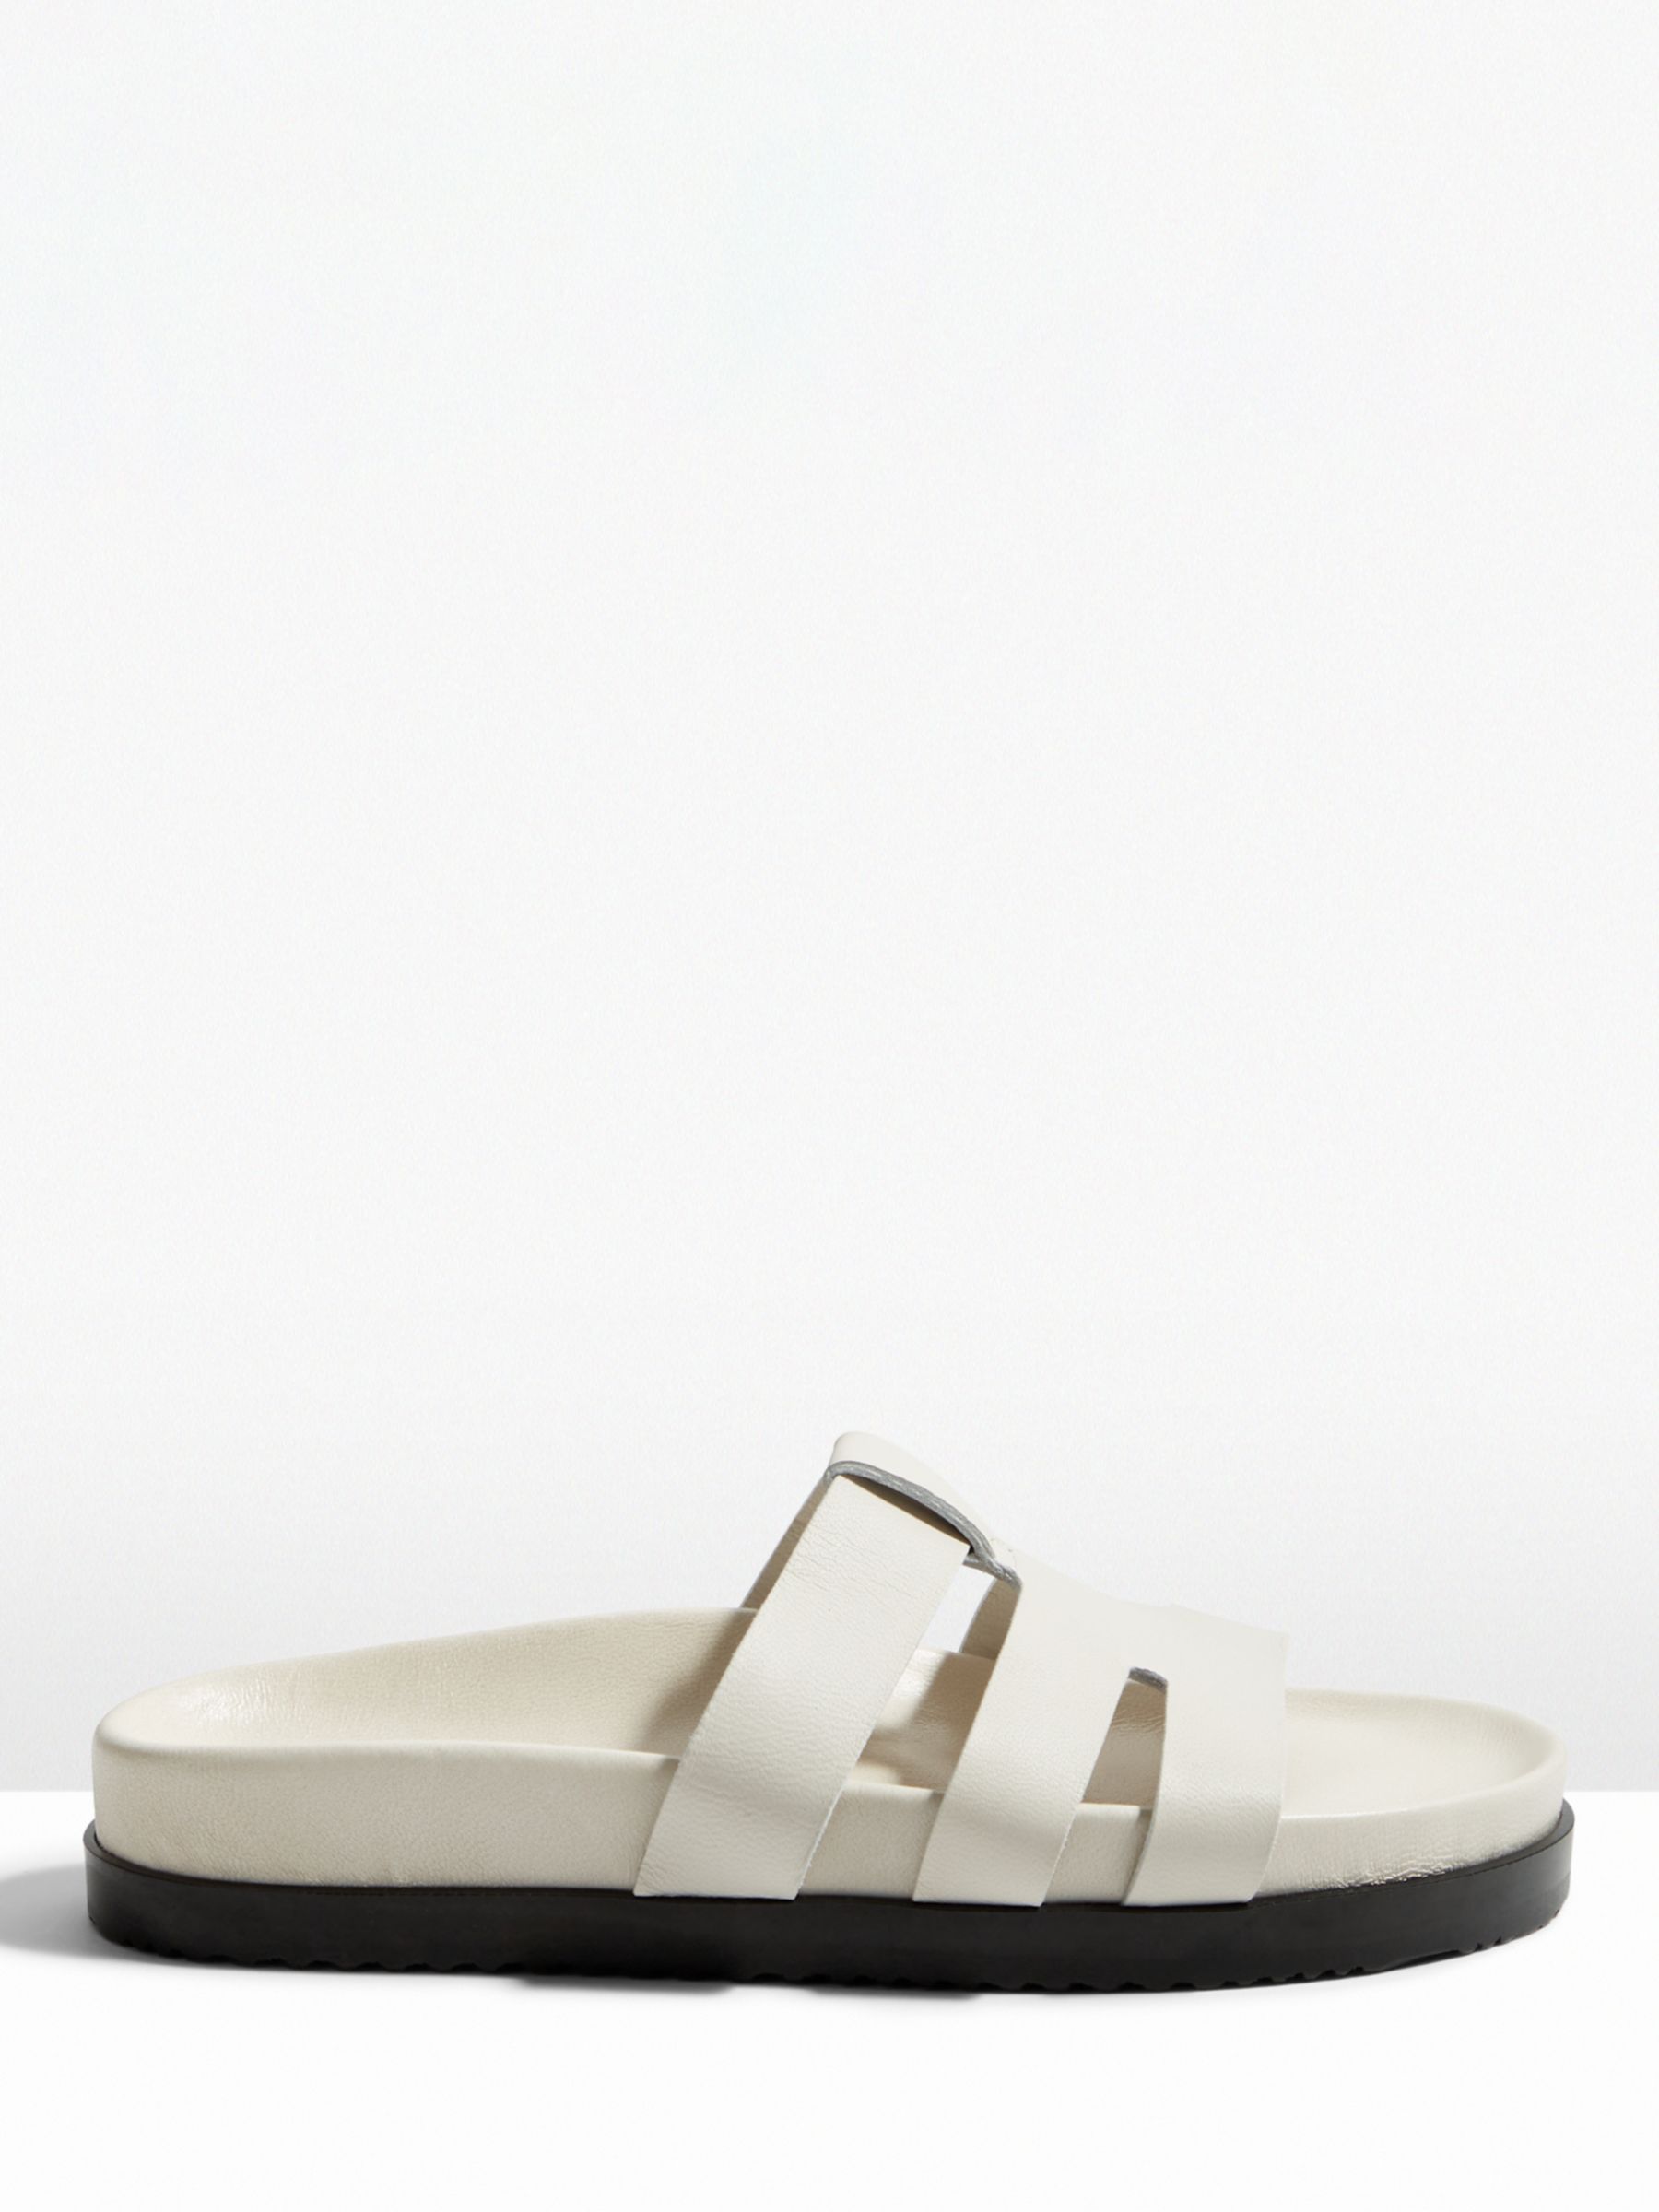 HUSH Carley Leather Cage Slide Sandals, Off White at John Lewis & Partners